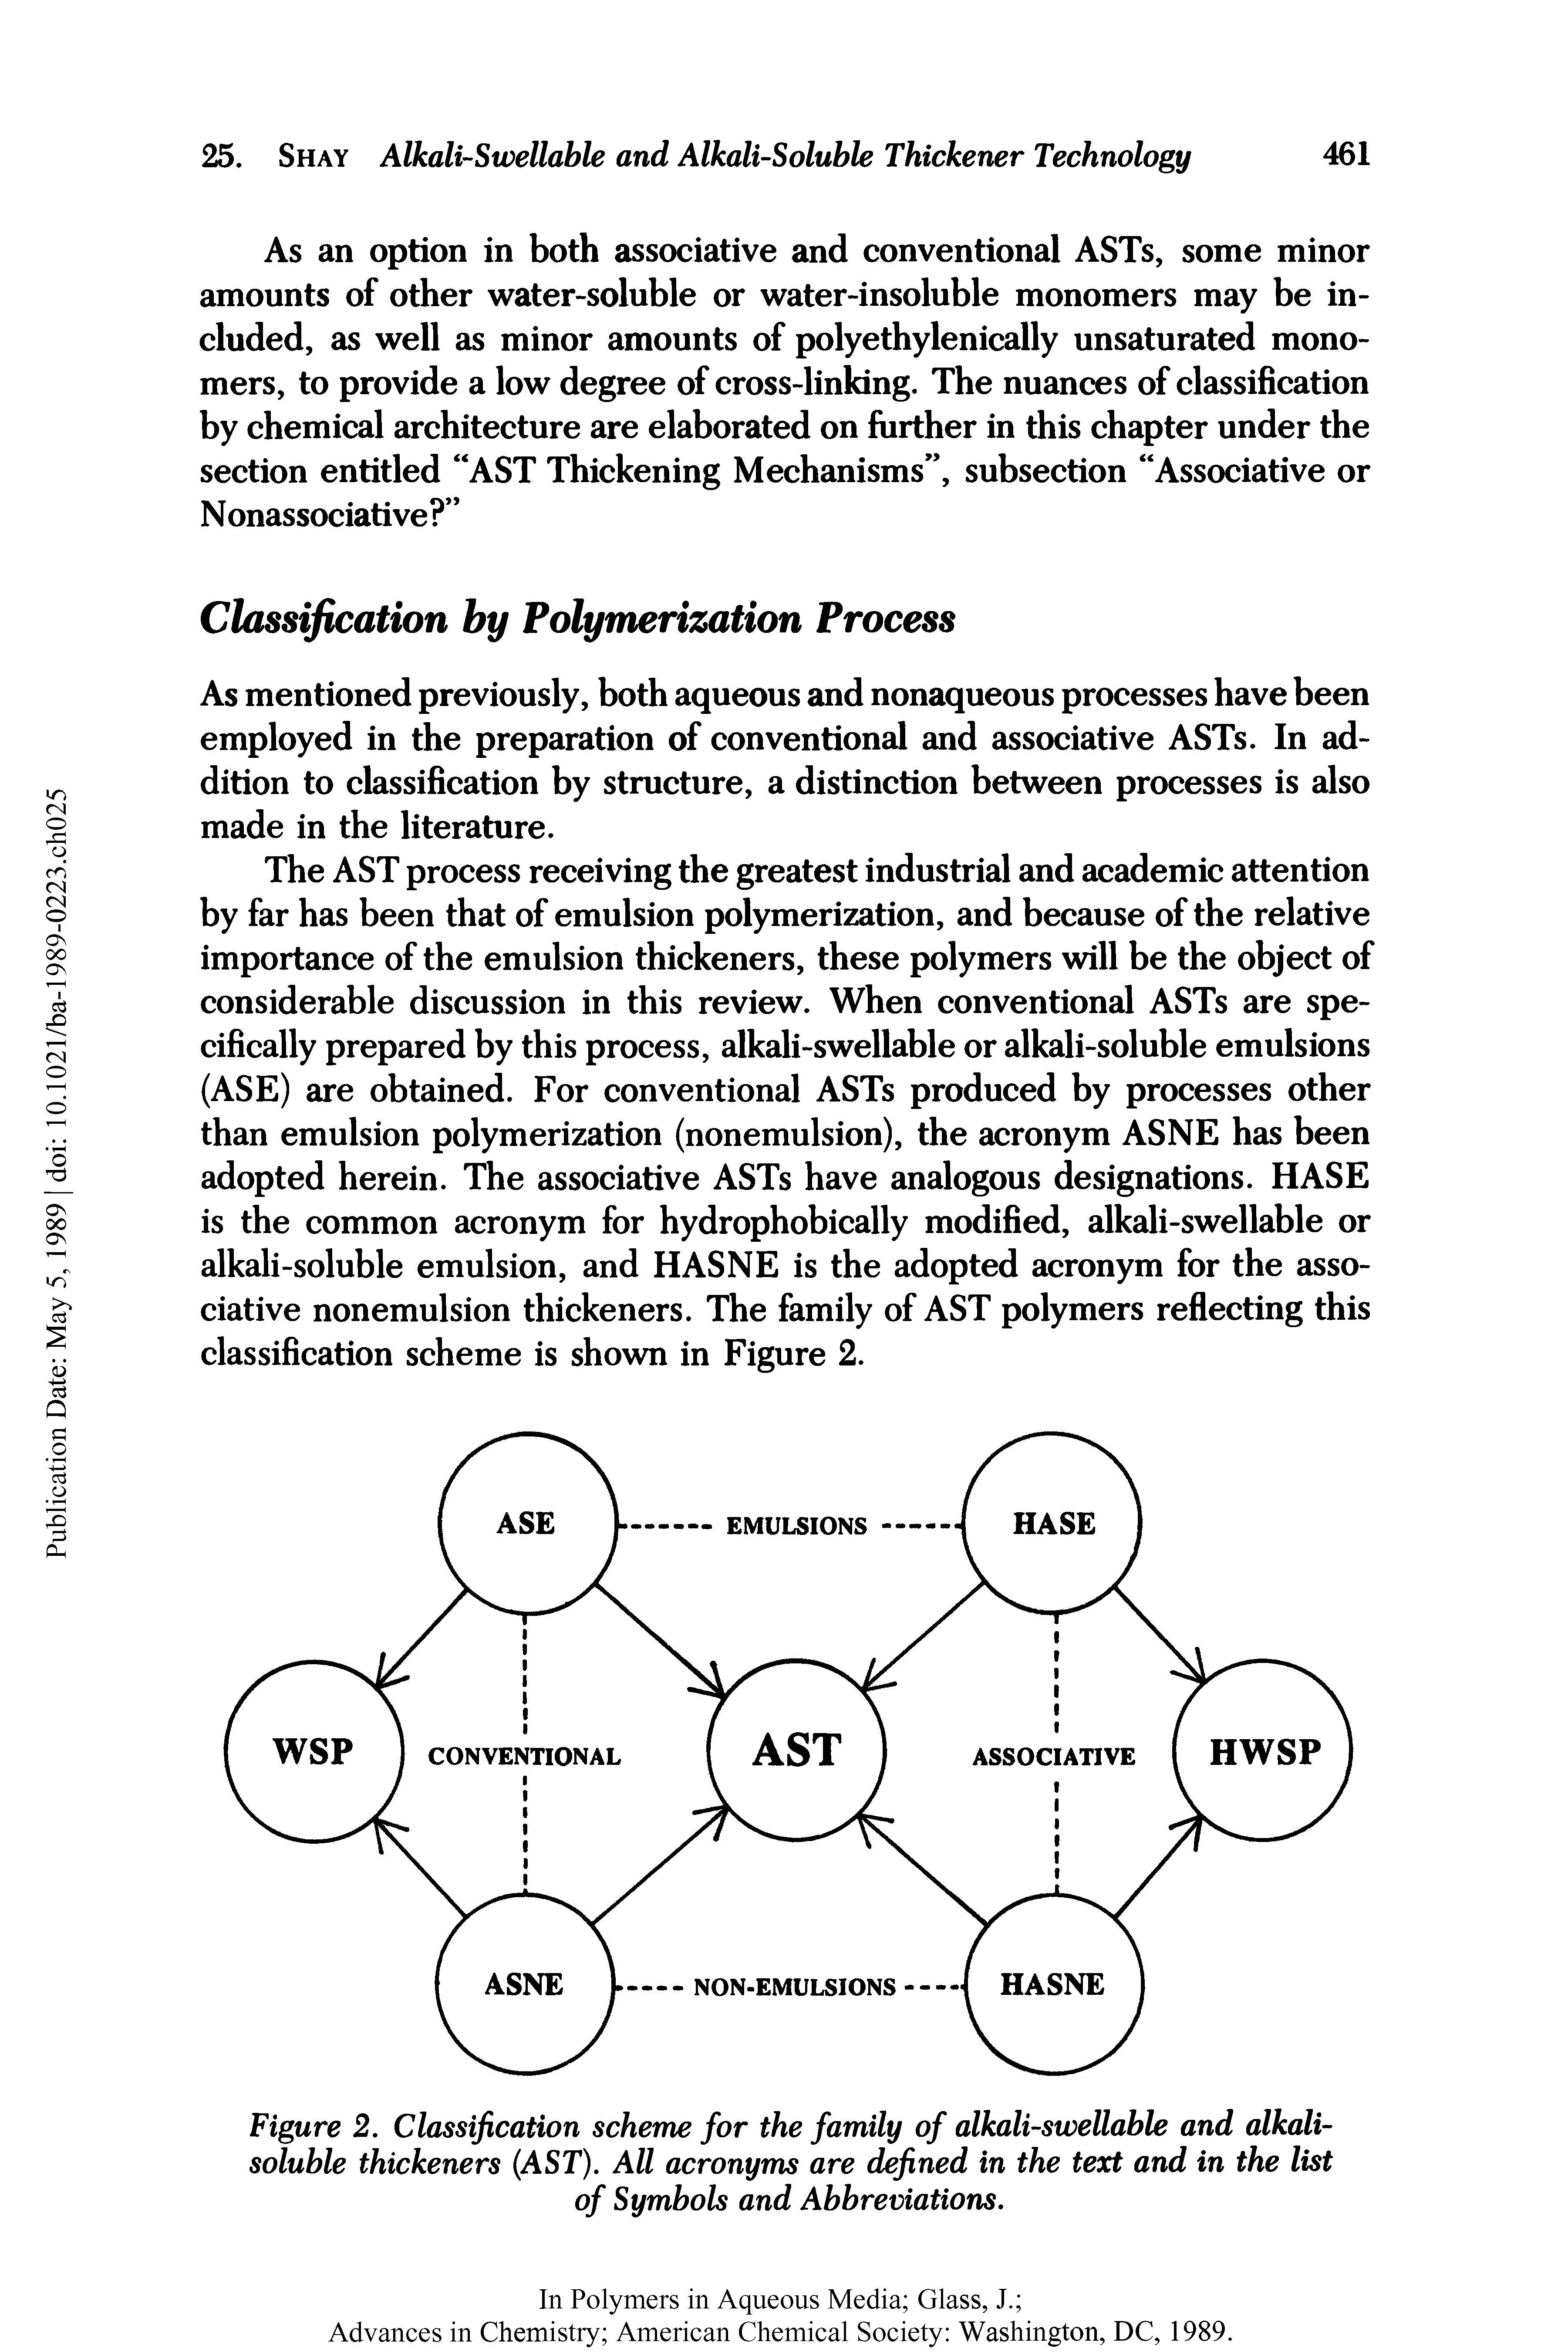 Figure 2. Classification scheme for the family of alkali-swellable and alkali-soluble thickeners (AST). All acronyms are defined in the text and in the list of Symbols and Abbreviations.